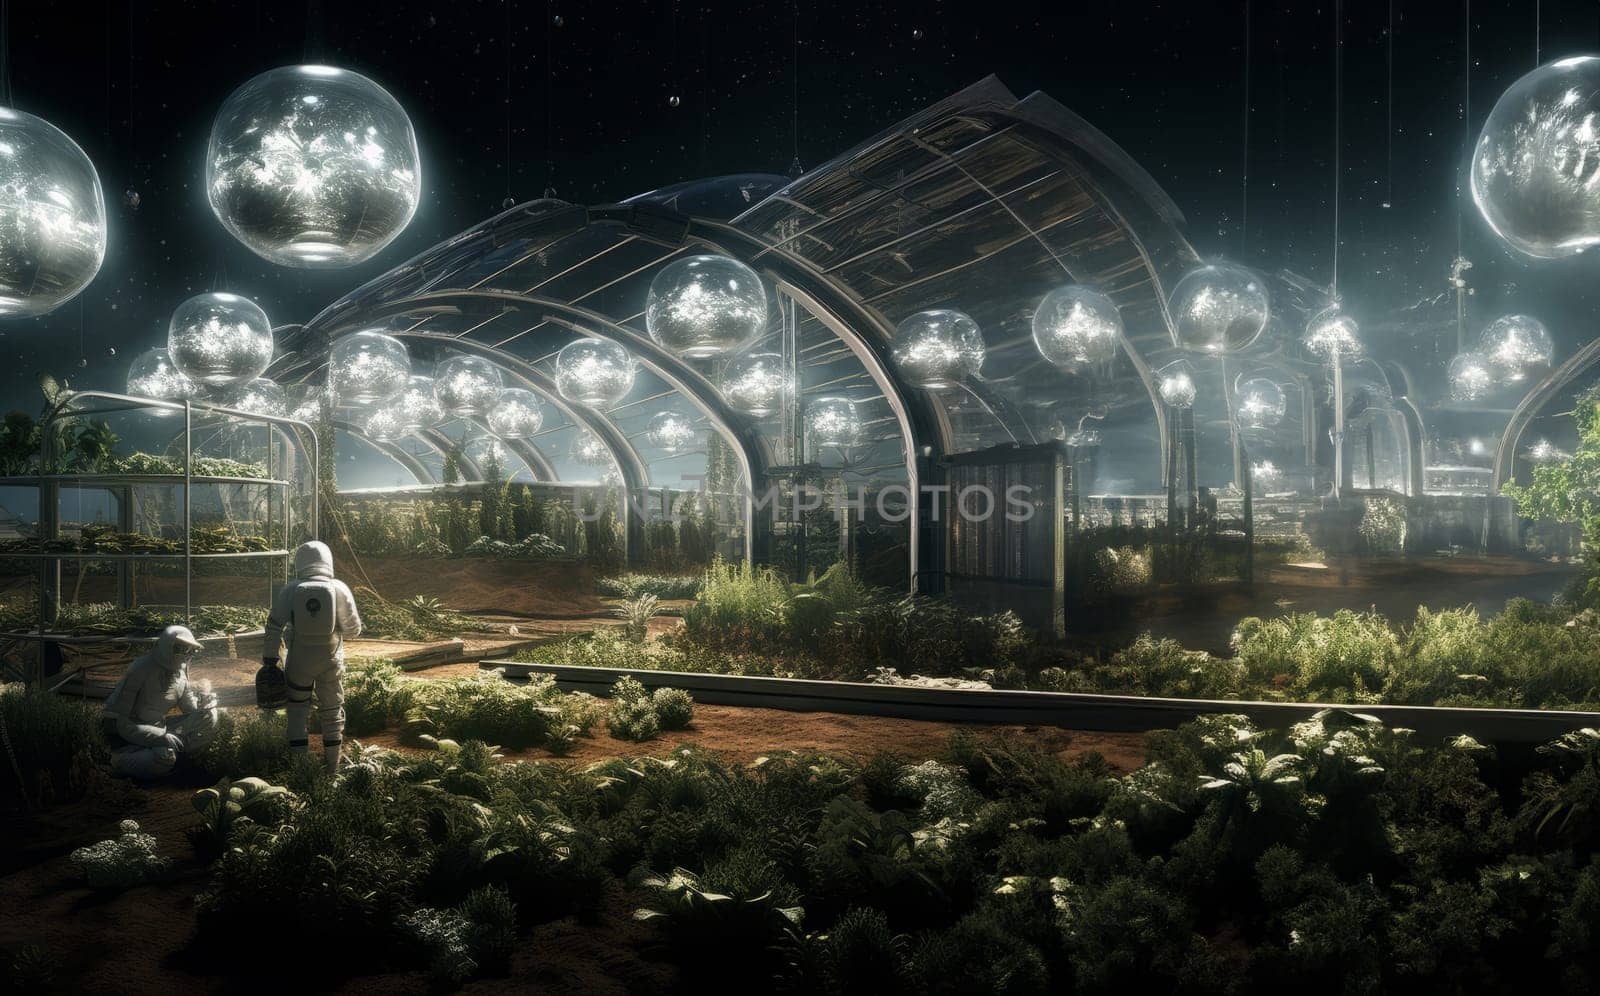 A futuristic depiction of agriculture shows cultivation and farming in glass enclosures on the surface of Mars in space, highlighting innovation and sustainability efforts in space colonization and exploration.Generated image.